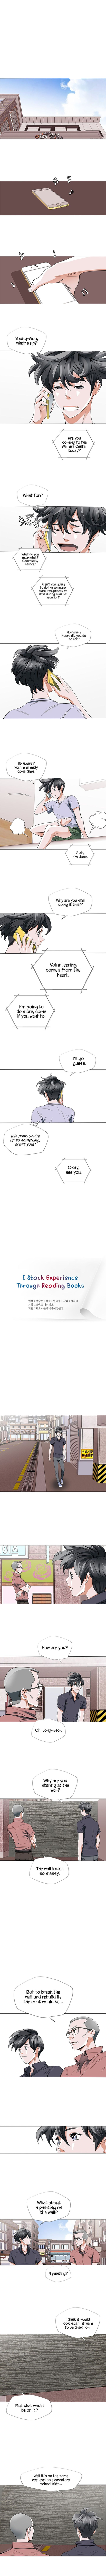 i_stack_experience_through_reading_books_14_2